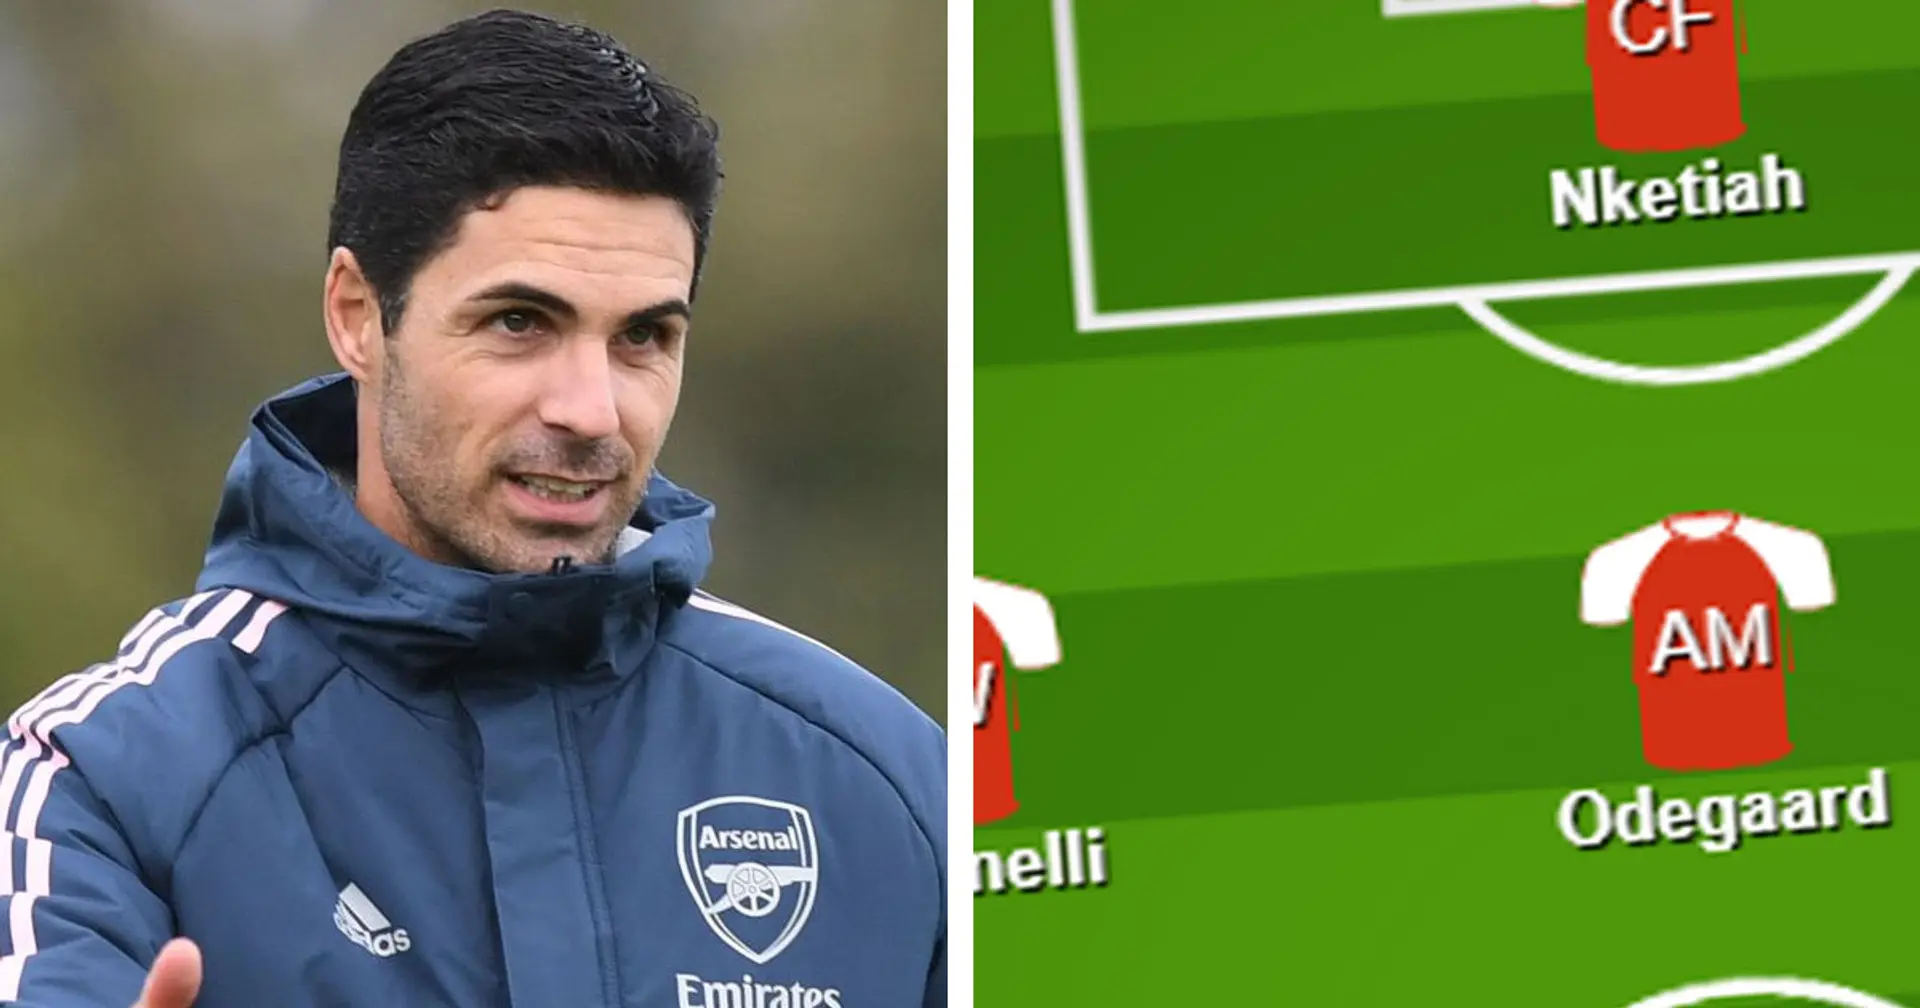 'Why change a winning formula': Arsenal fans select ultimate XI for Man United clash